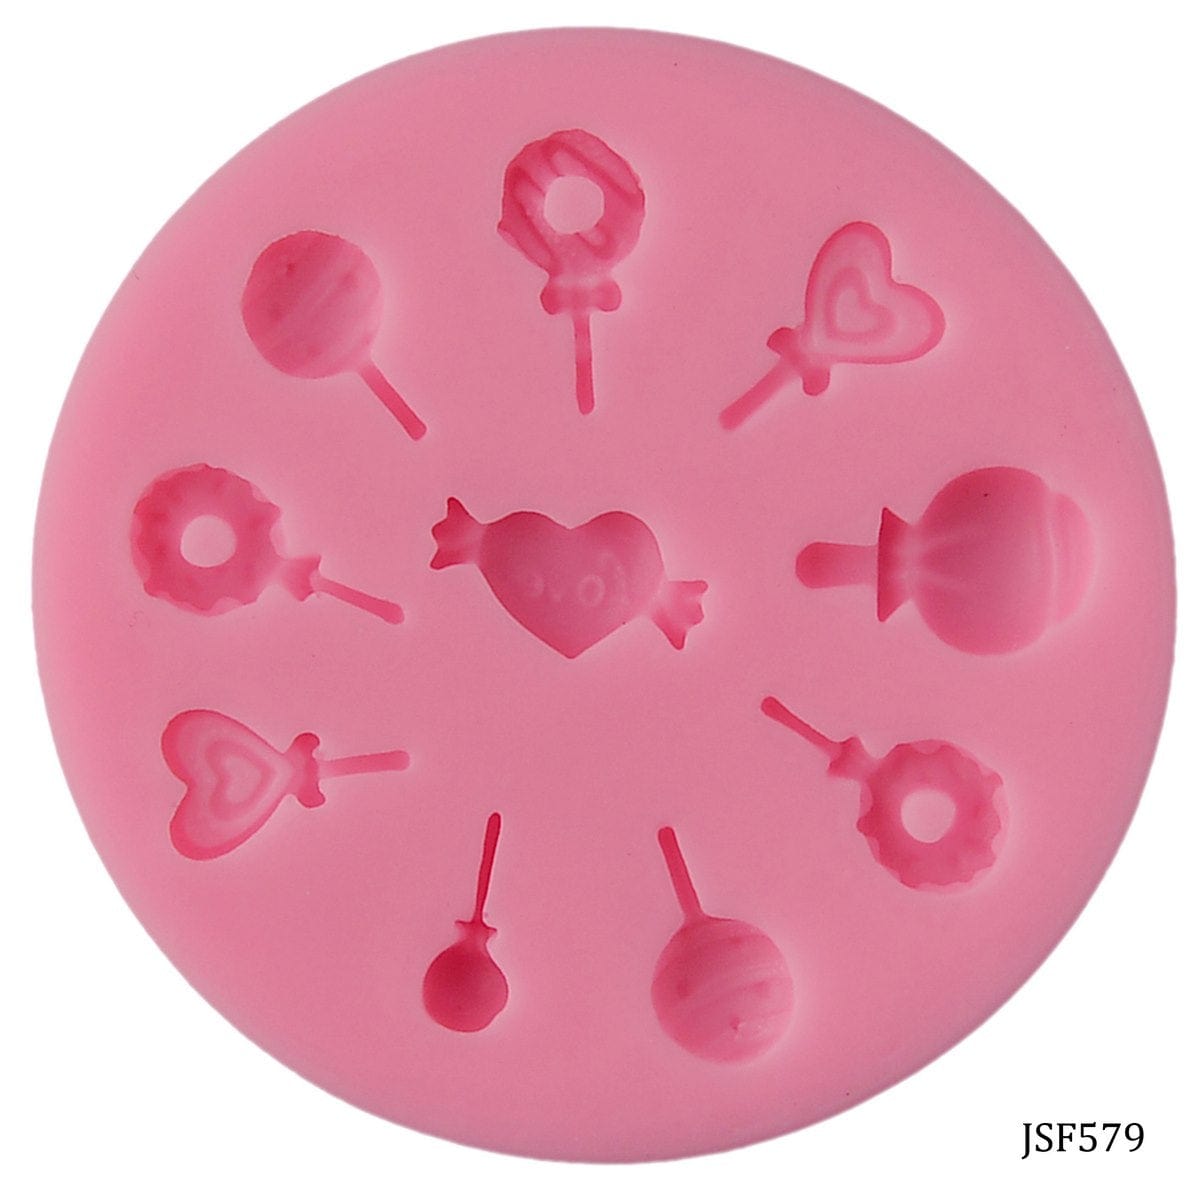 jags-mumbai Mould Silicone Mould Love Candy